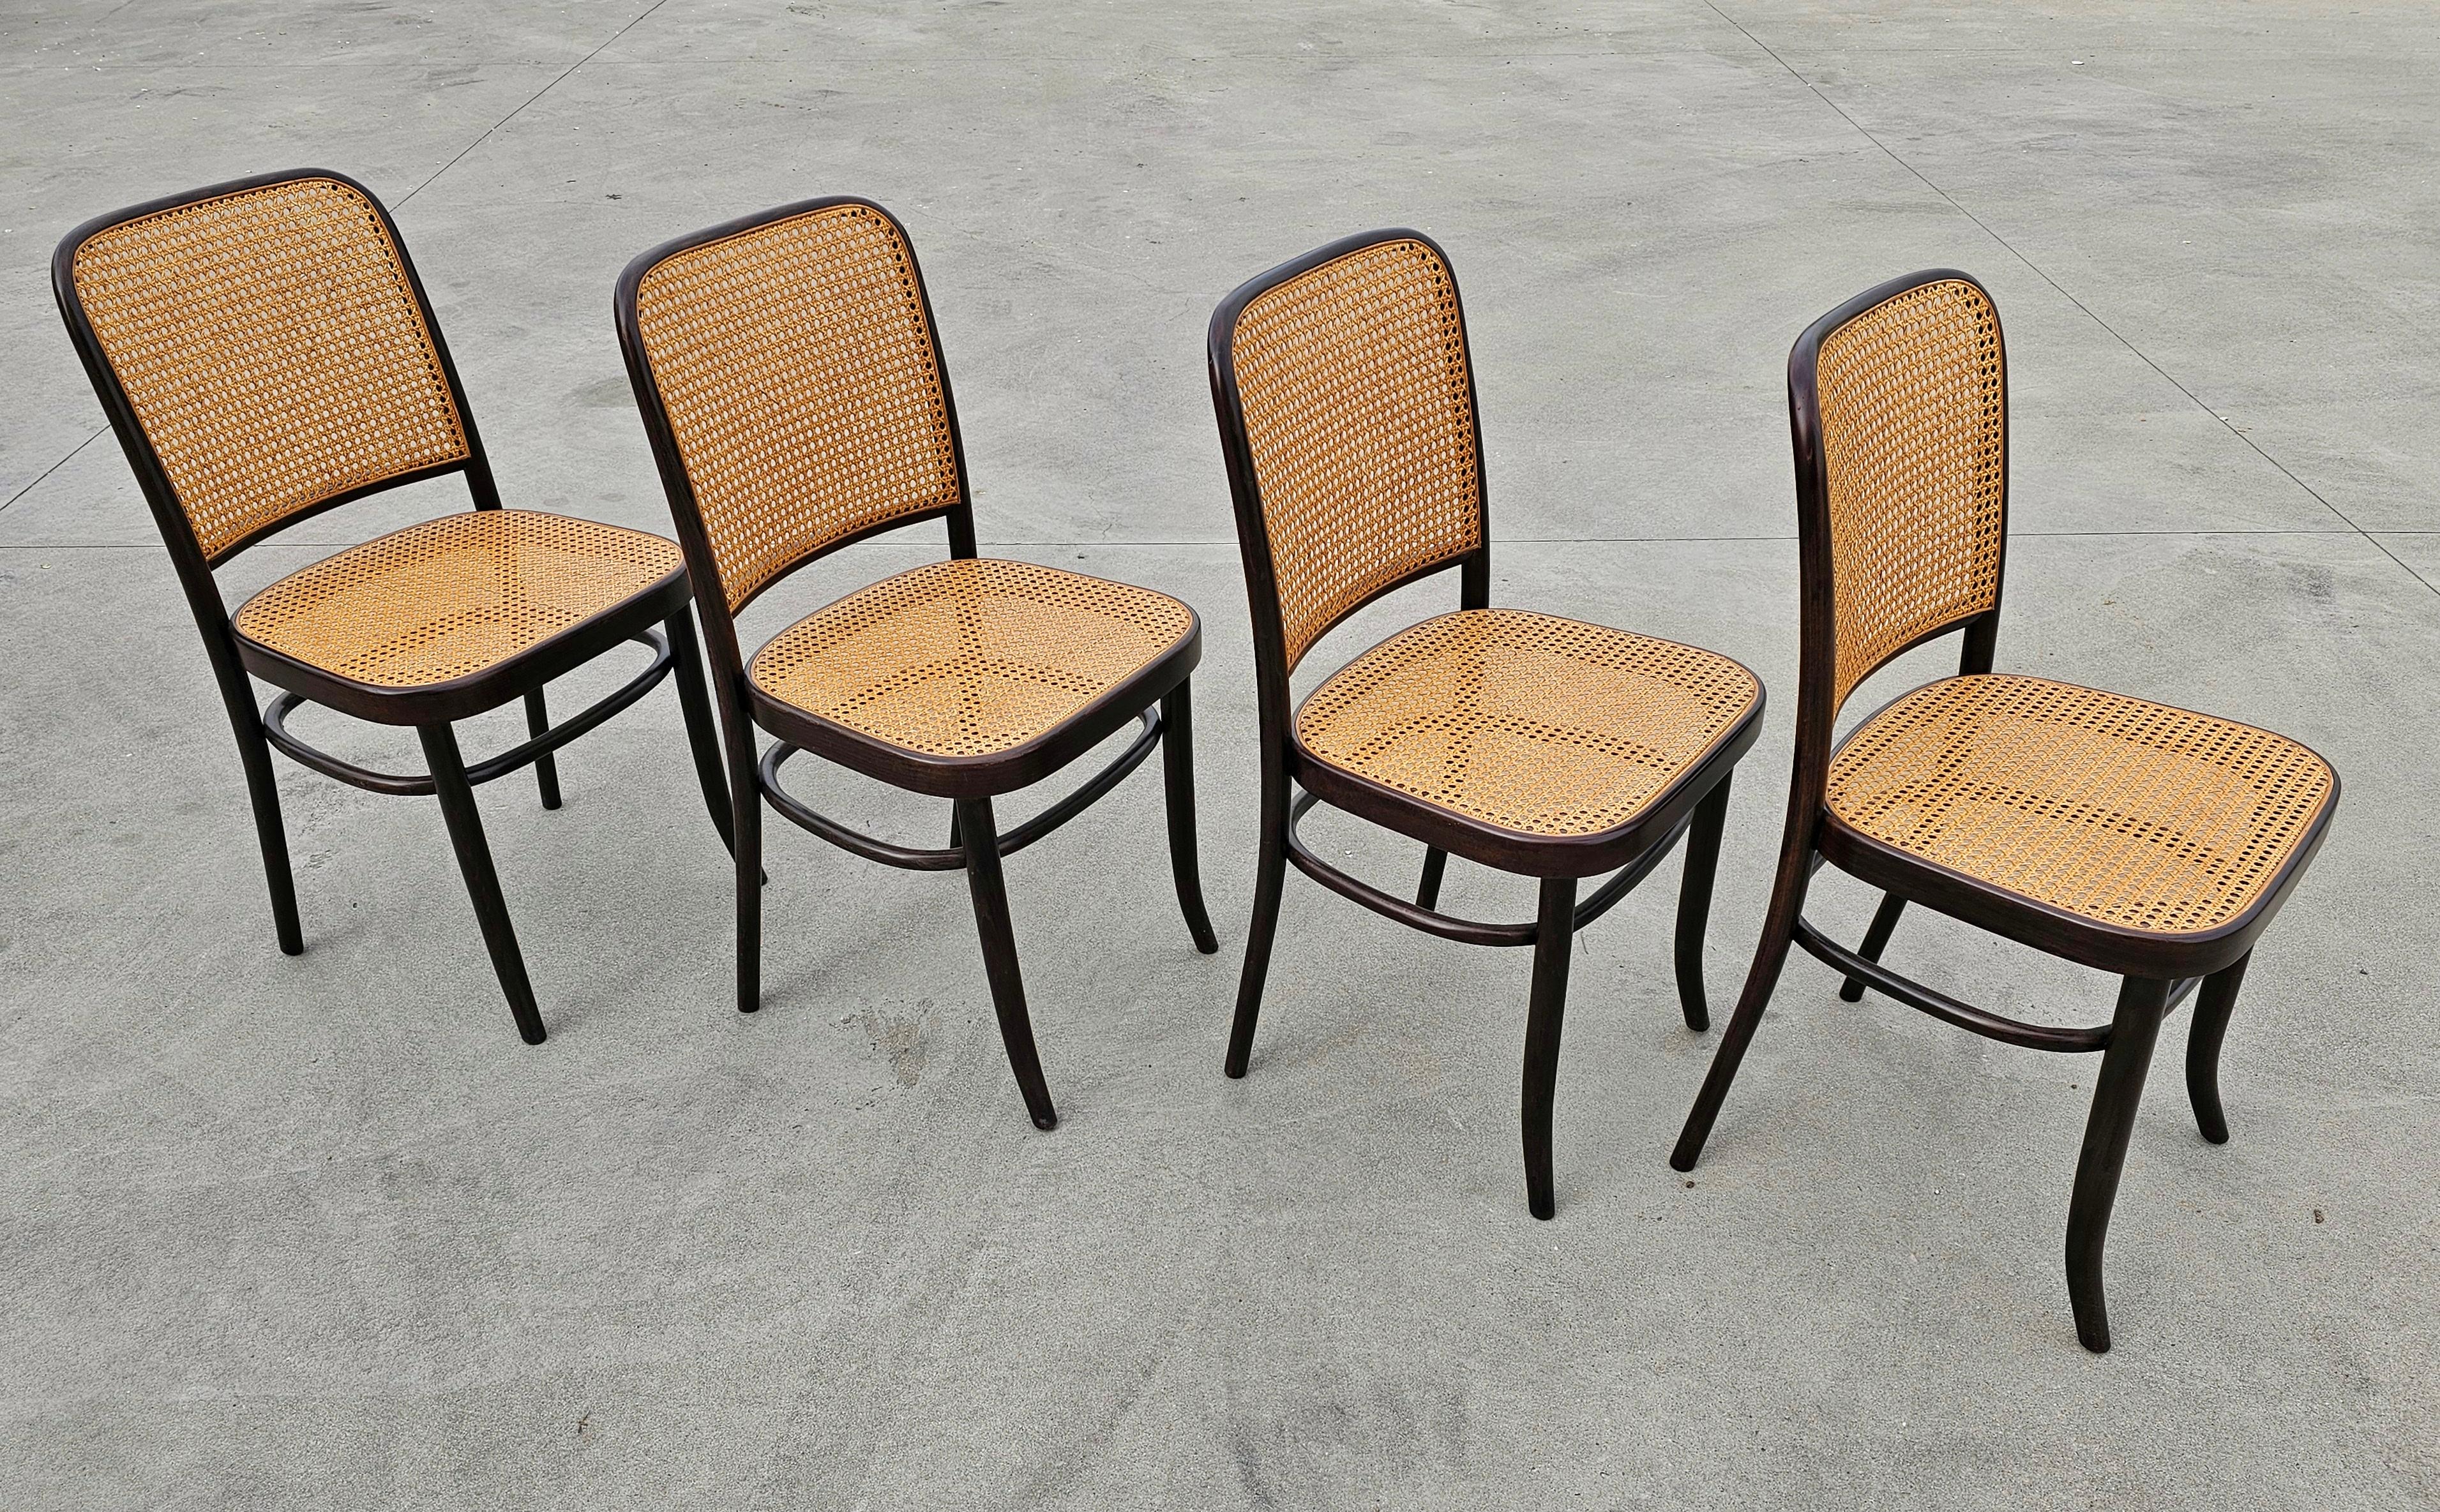 In this listing you will find a set of rare vintage dining chairs designed by Josef Hoffmann for Mundus. The frame of the chairs is done in beech bentwood and painted in black with cane seats and backrest.

Chairs were manufactured by Mundus